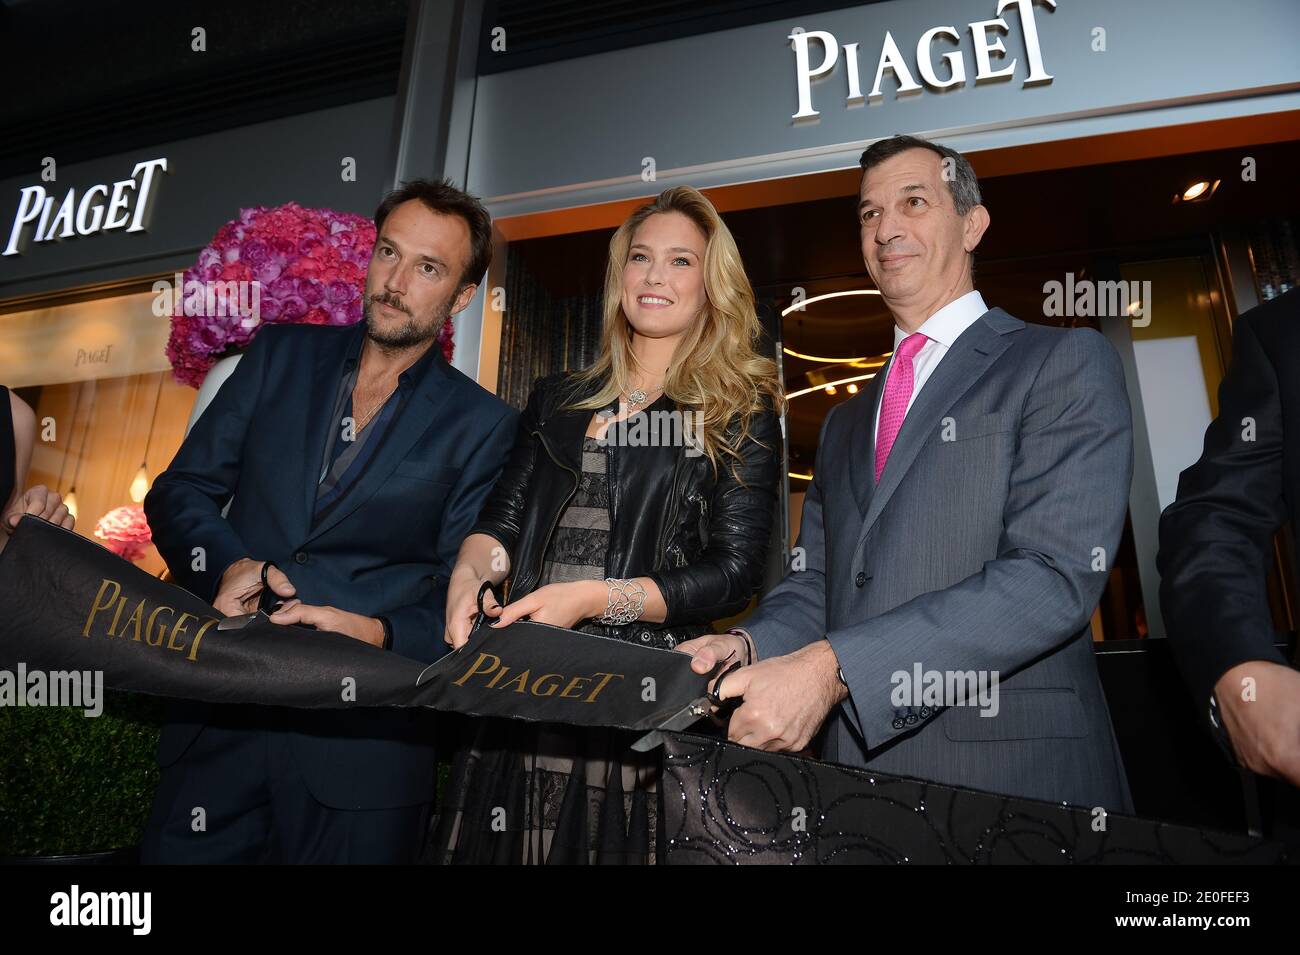 (L-R) Swiss rapper/actor Carlos Leal, Israeli supermodel Bar Refaeli and Piaget CEO Philippe Leopold-Metzger at the opening of Swiss jeweler Piaget's new flagship store in Geneva, Switzerland on May 10, 2012. Photo by Loona/ABACAPRESS.COM Stock Photo